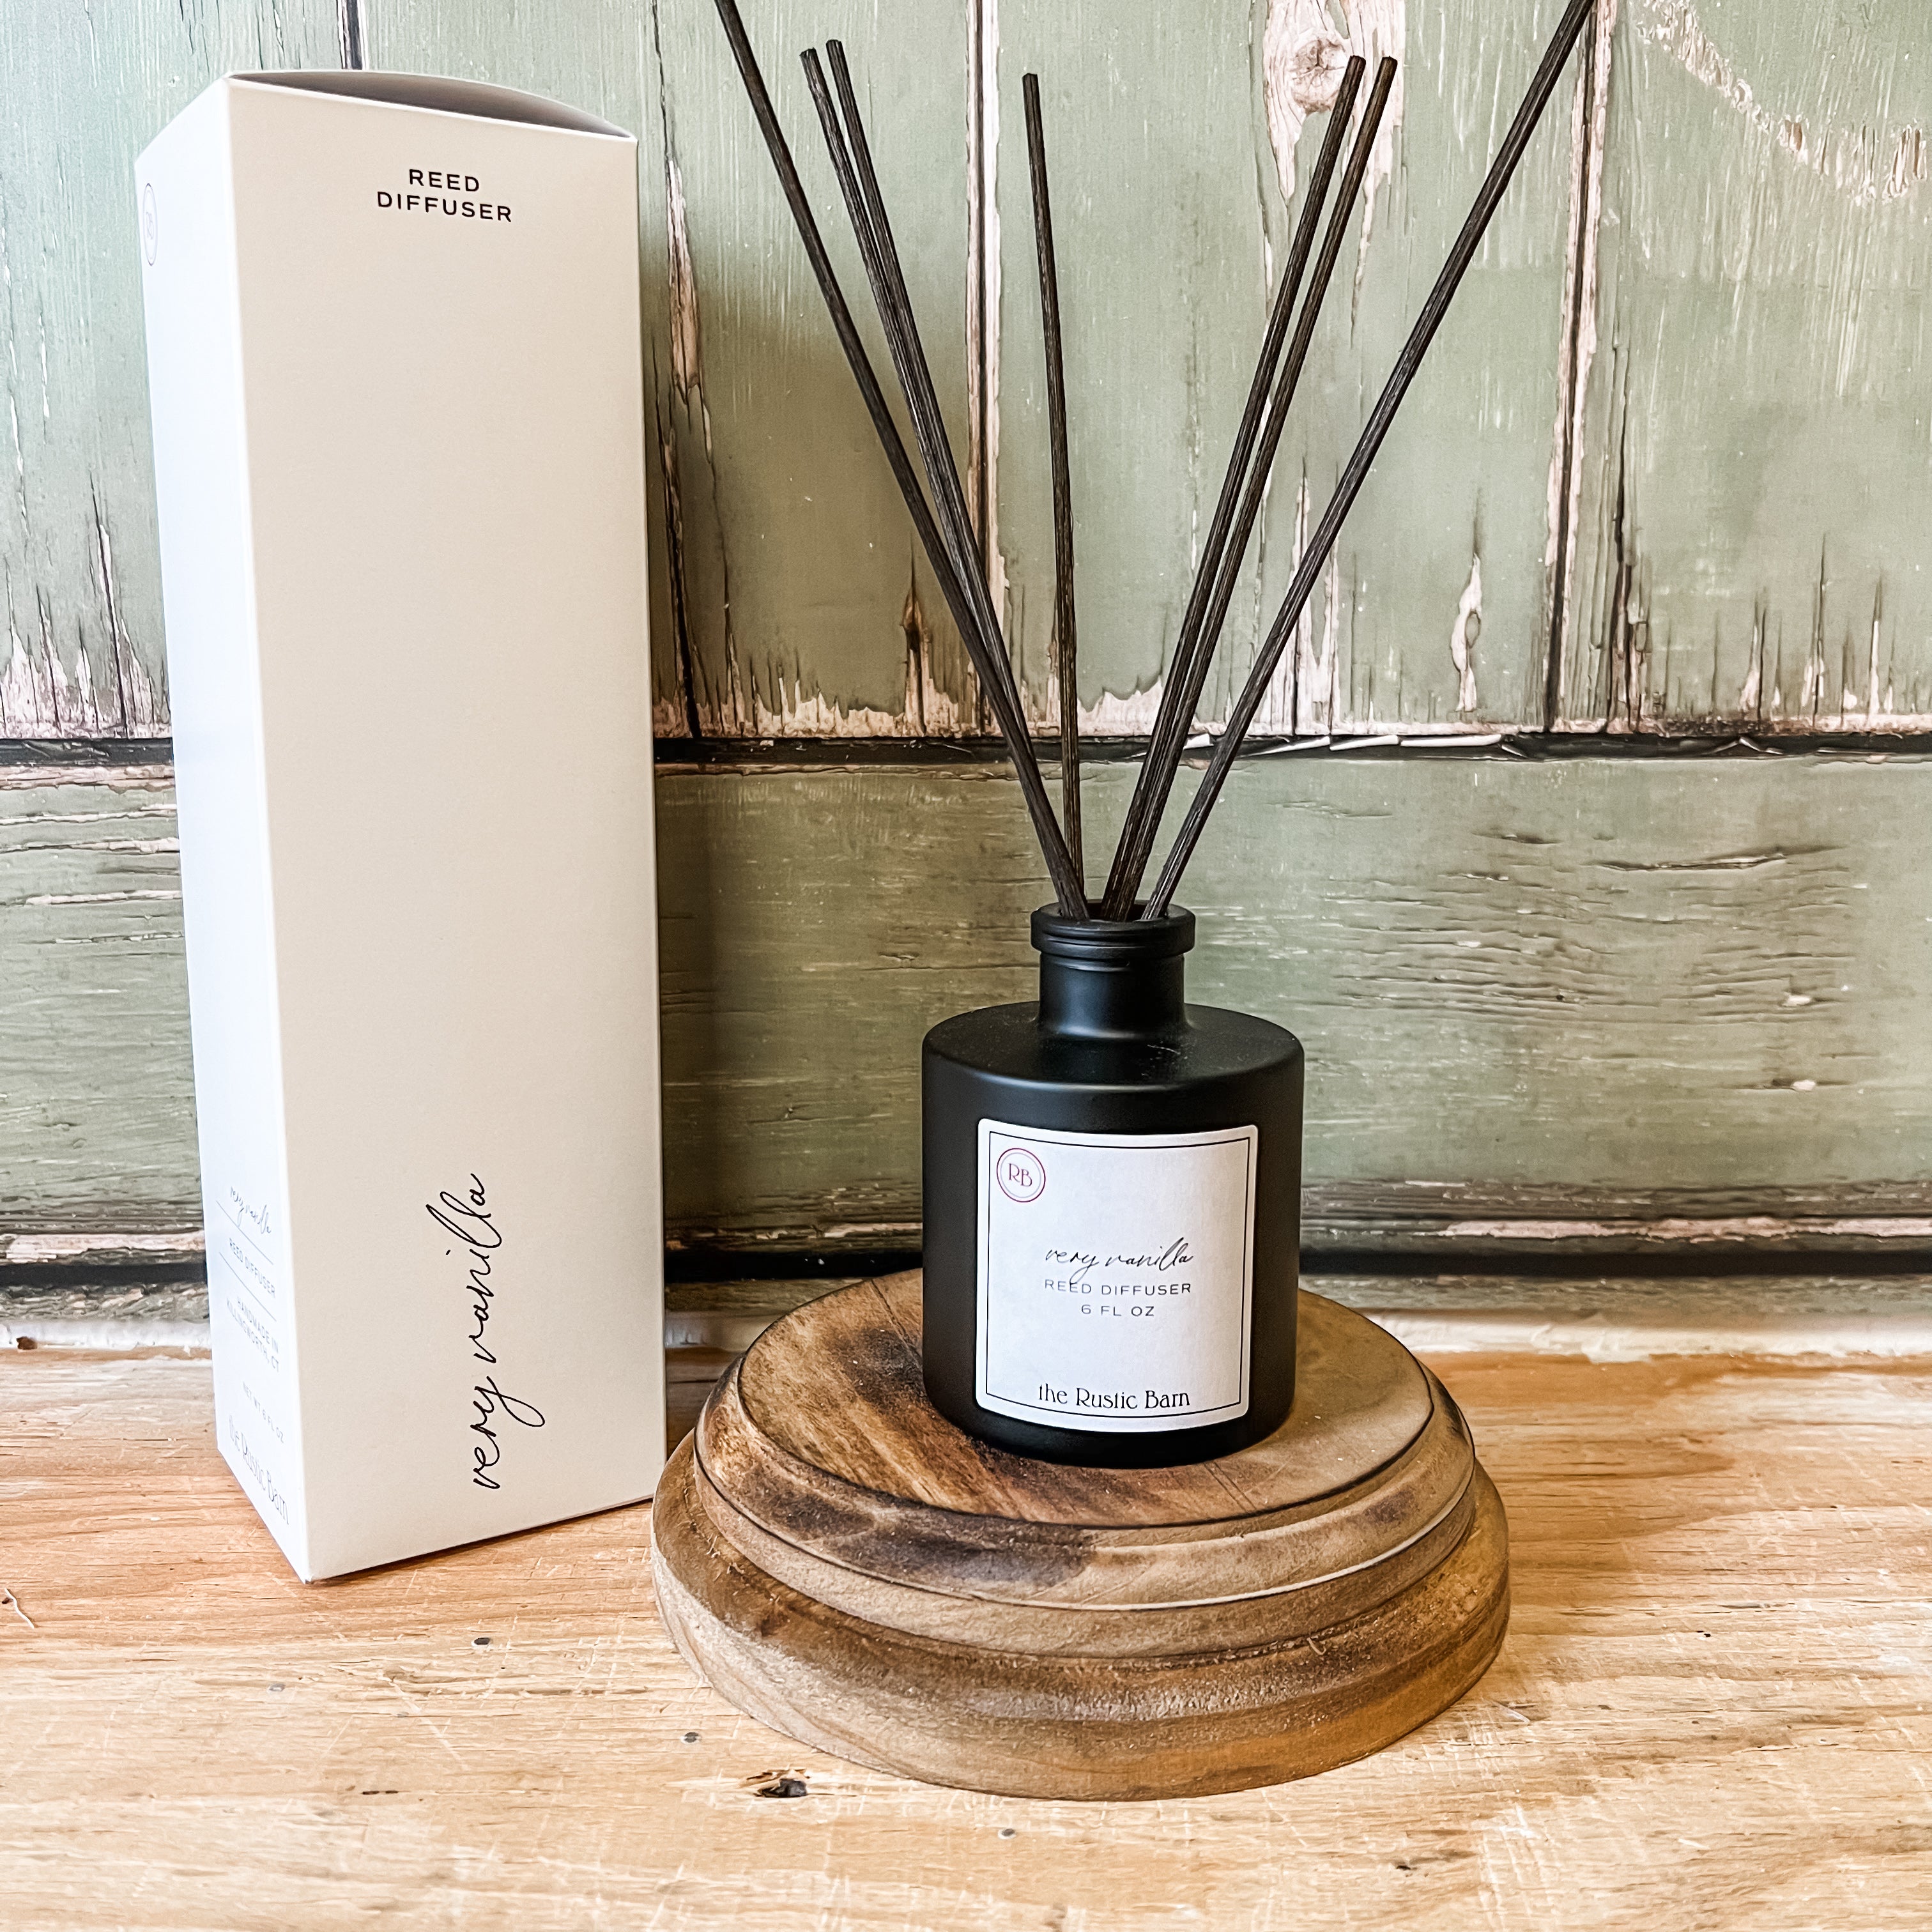 Handmade vanilla scented reed diffuser with essential oils the rustic barn ct